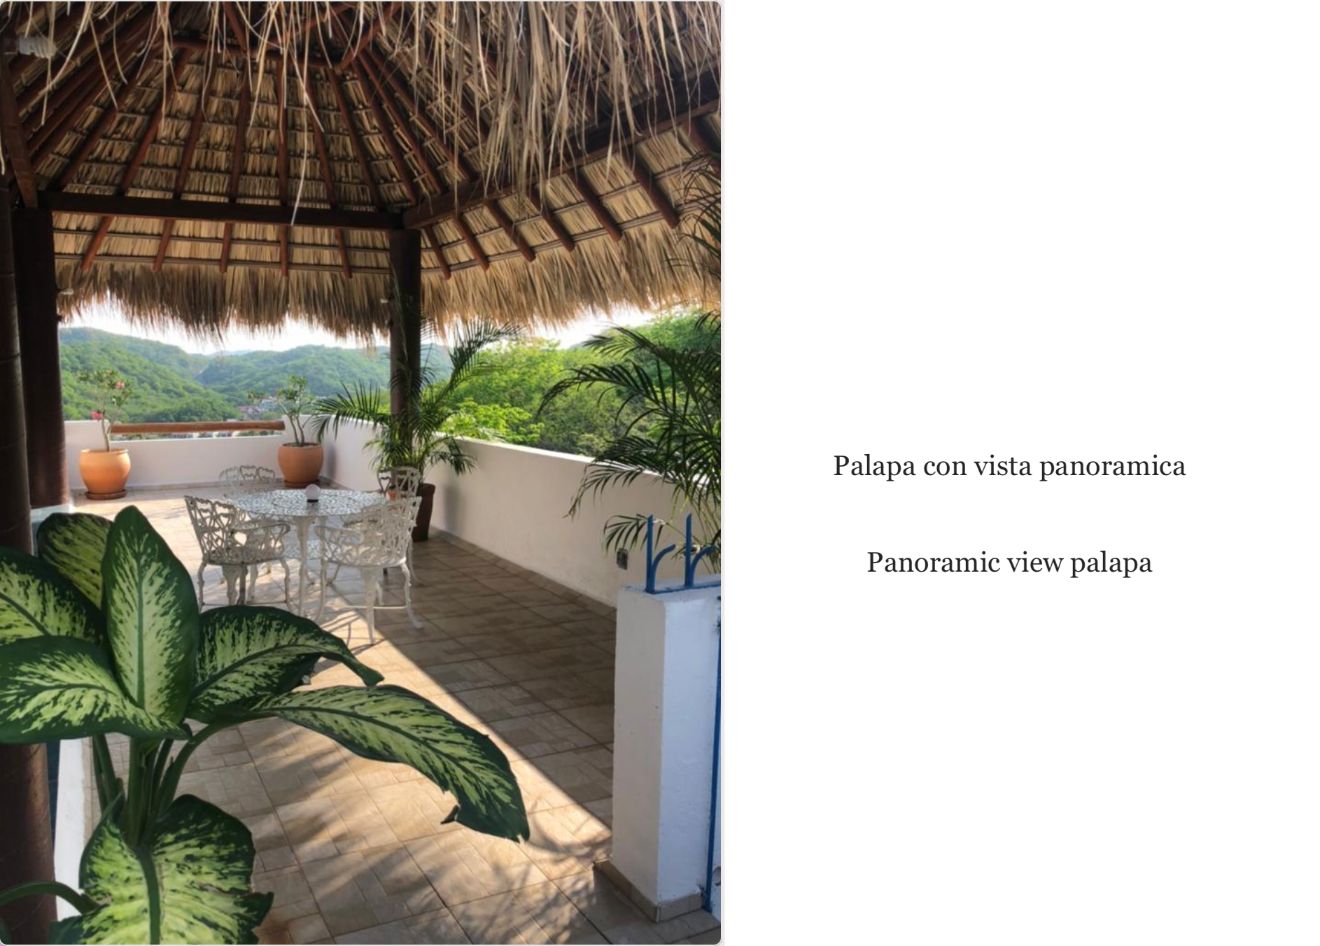 Villa with 5 bedrooms, private pool, palapa, study and service room, 3 minutes from the beach in Residencial Conejos for sale Huatulco.